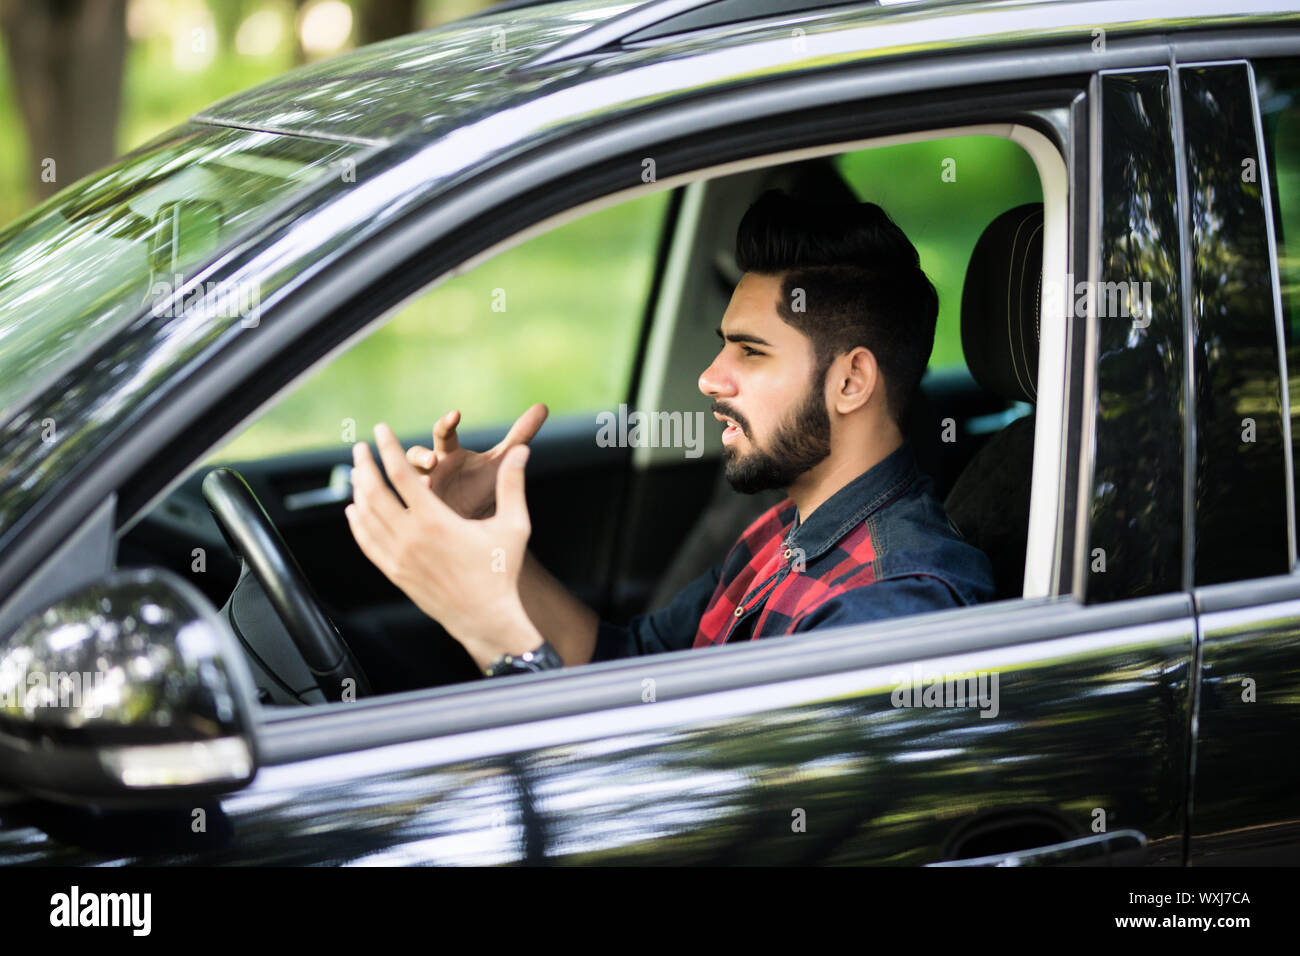 Young man driving a car and looks angry and screaming Stock Photo